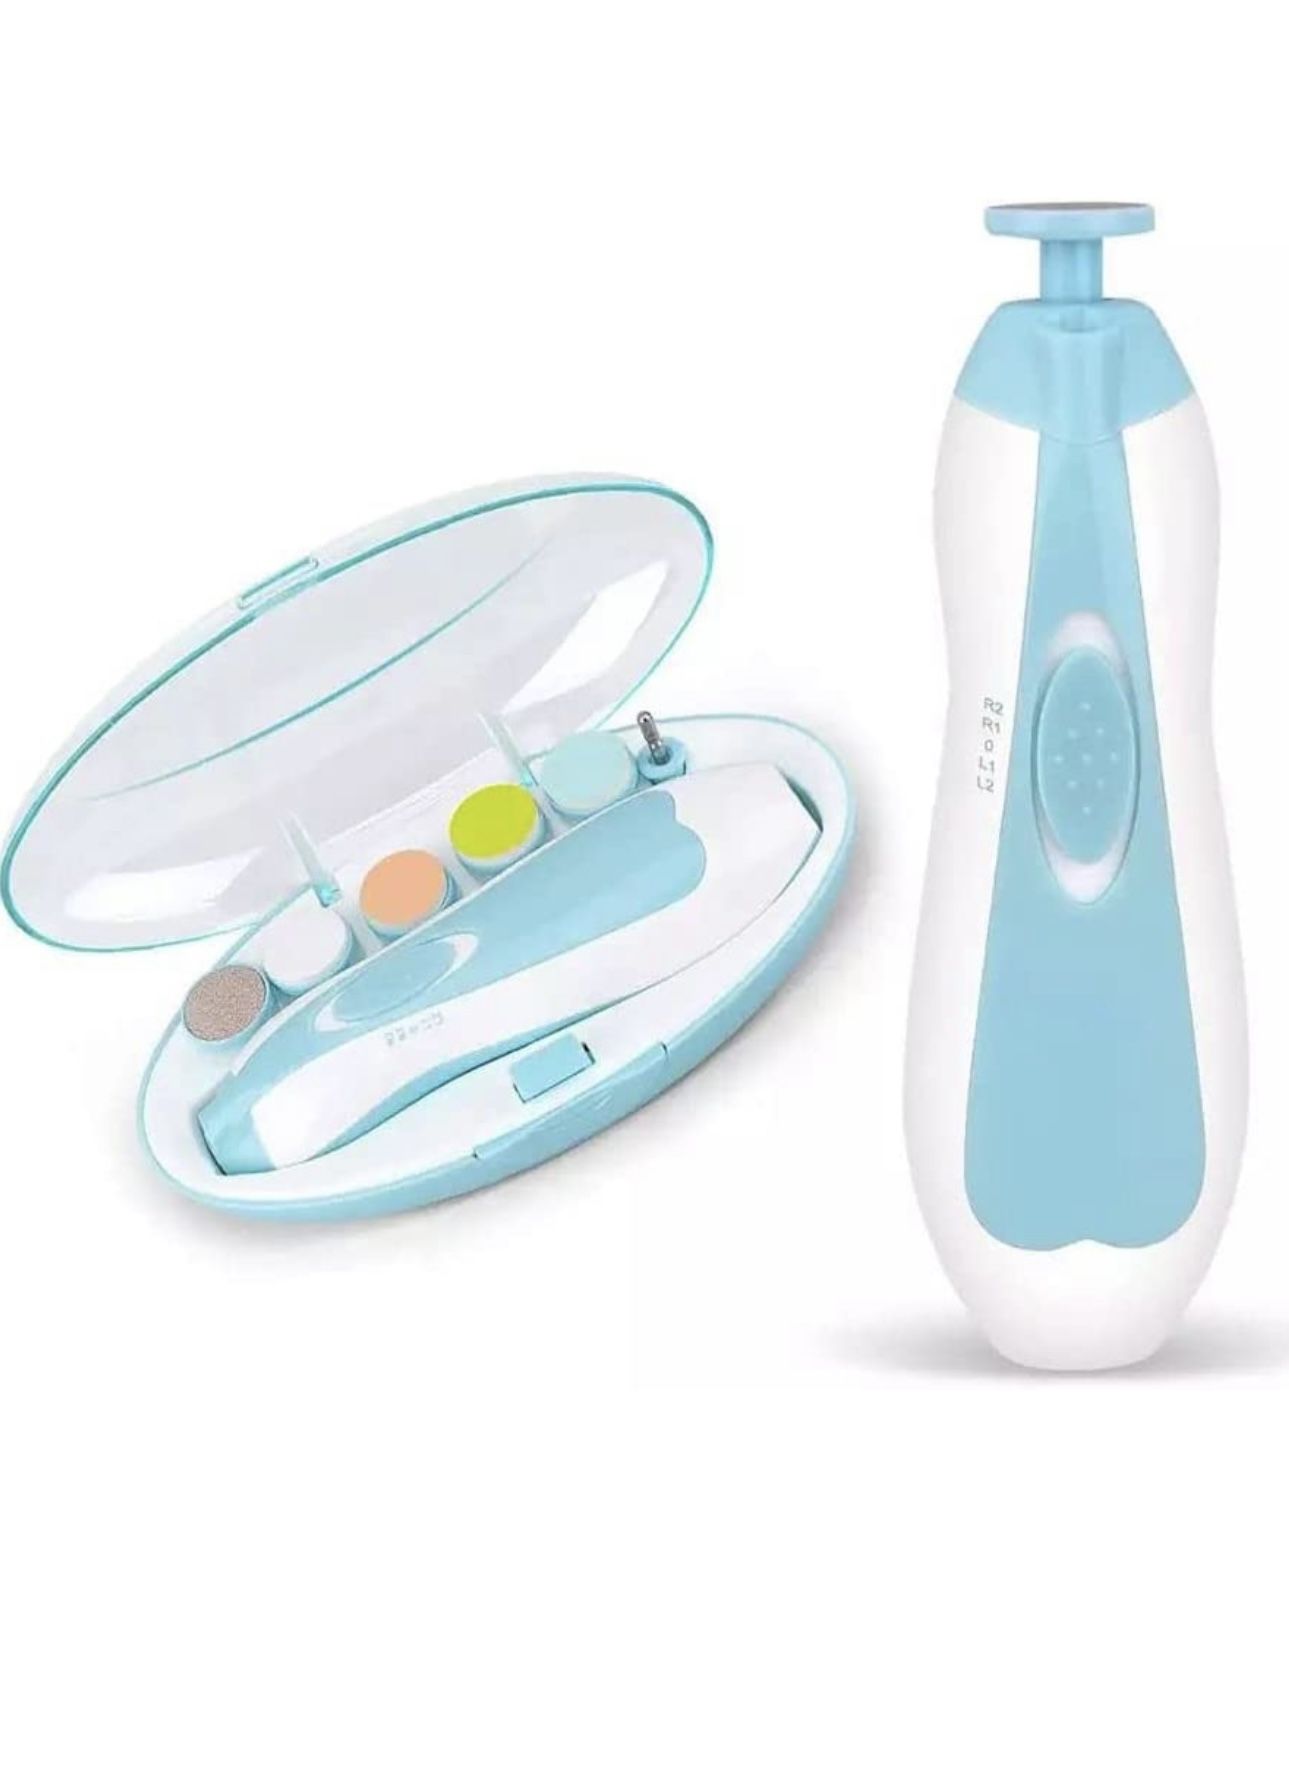 Pampered Baby Electric Nail Trimmer